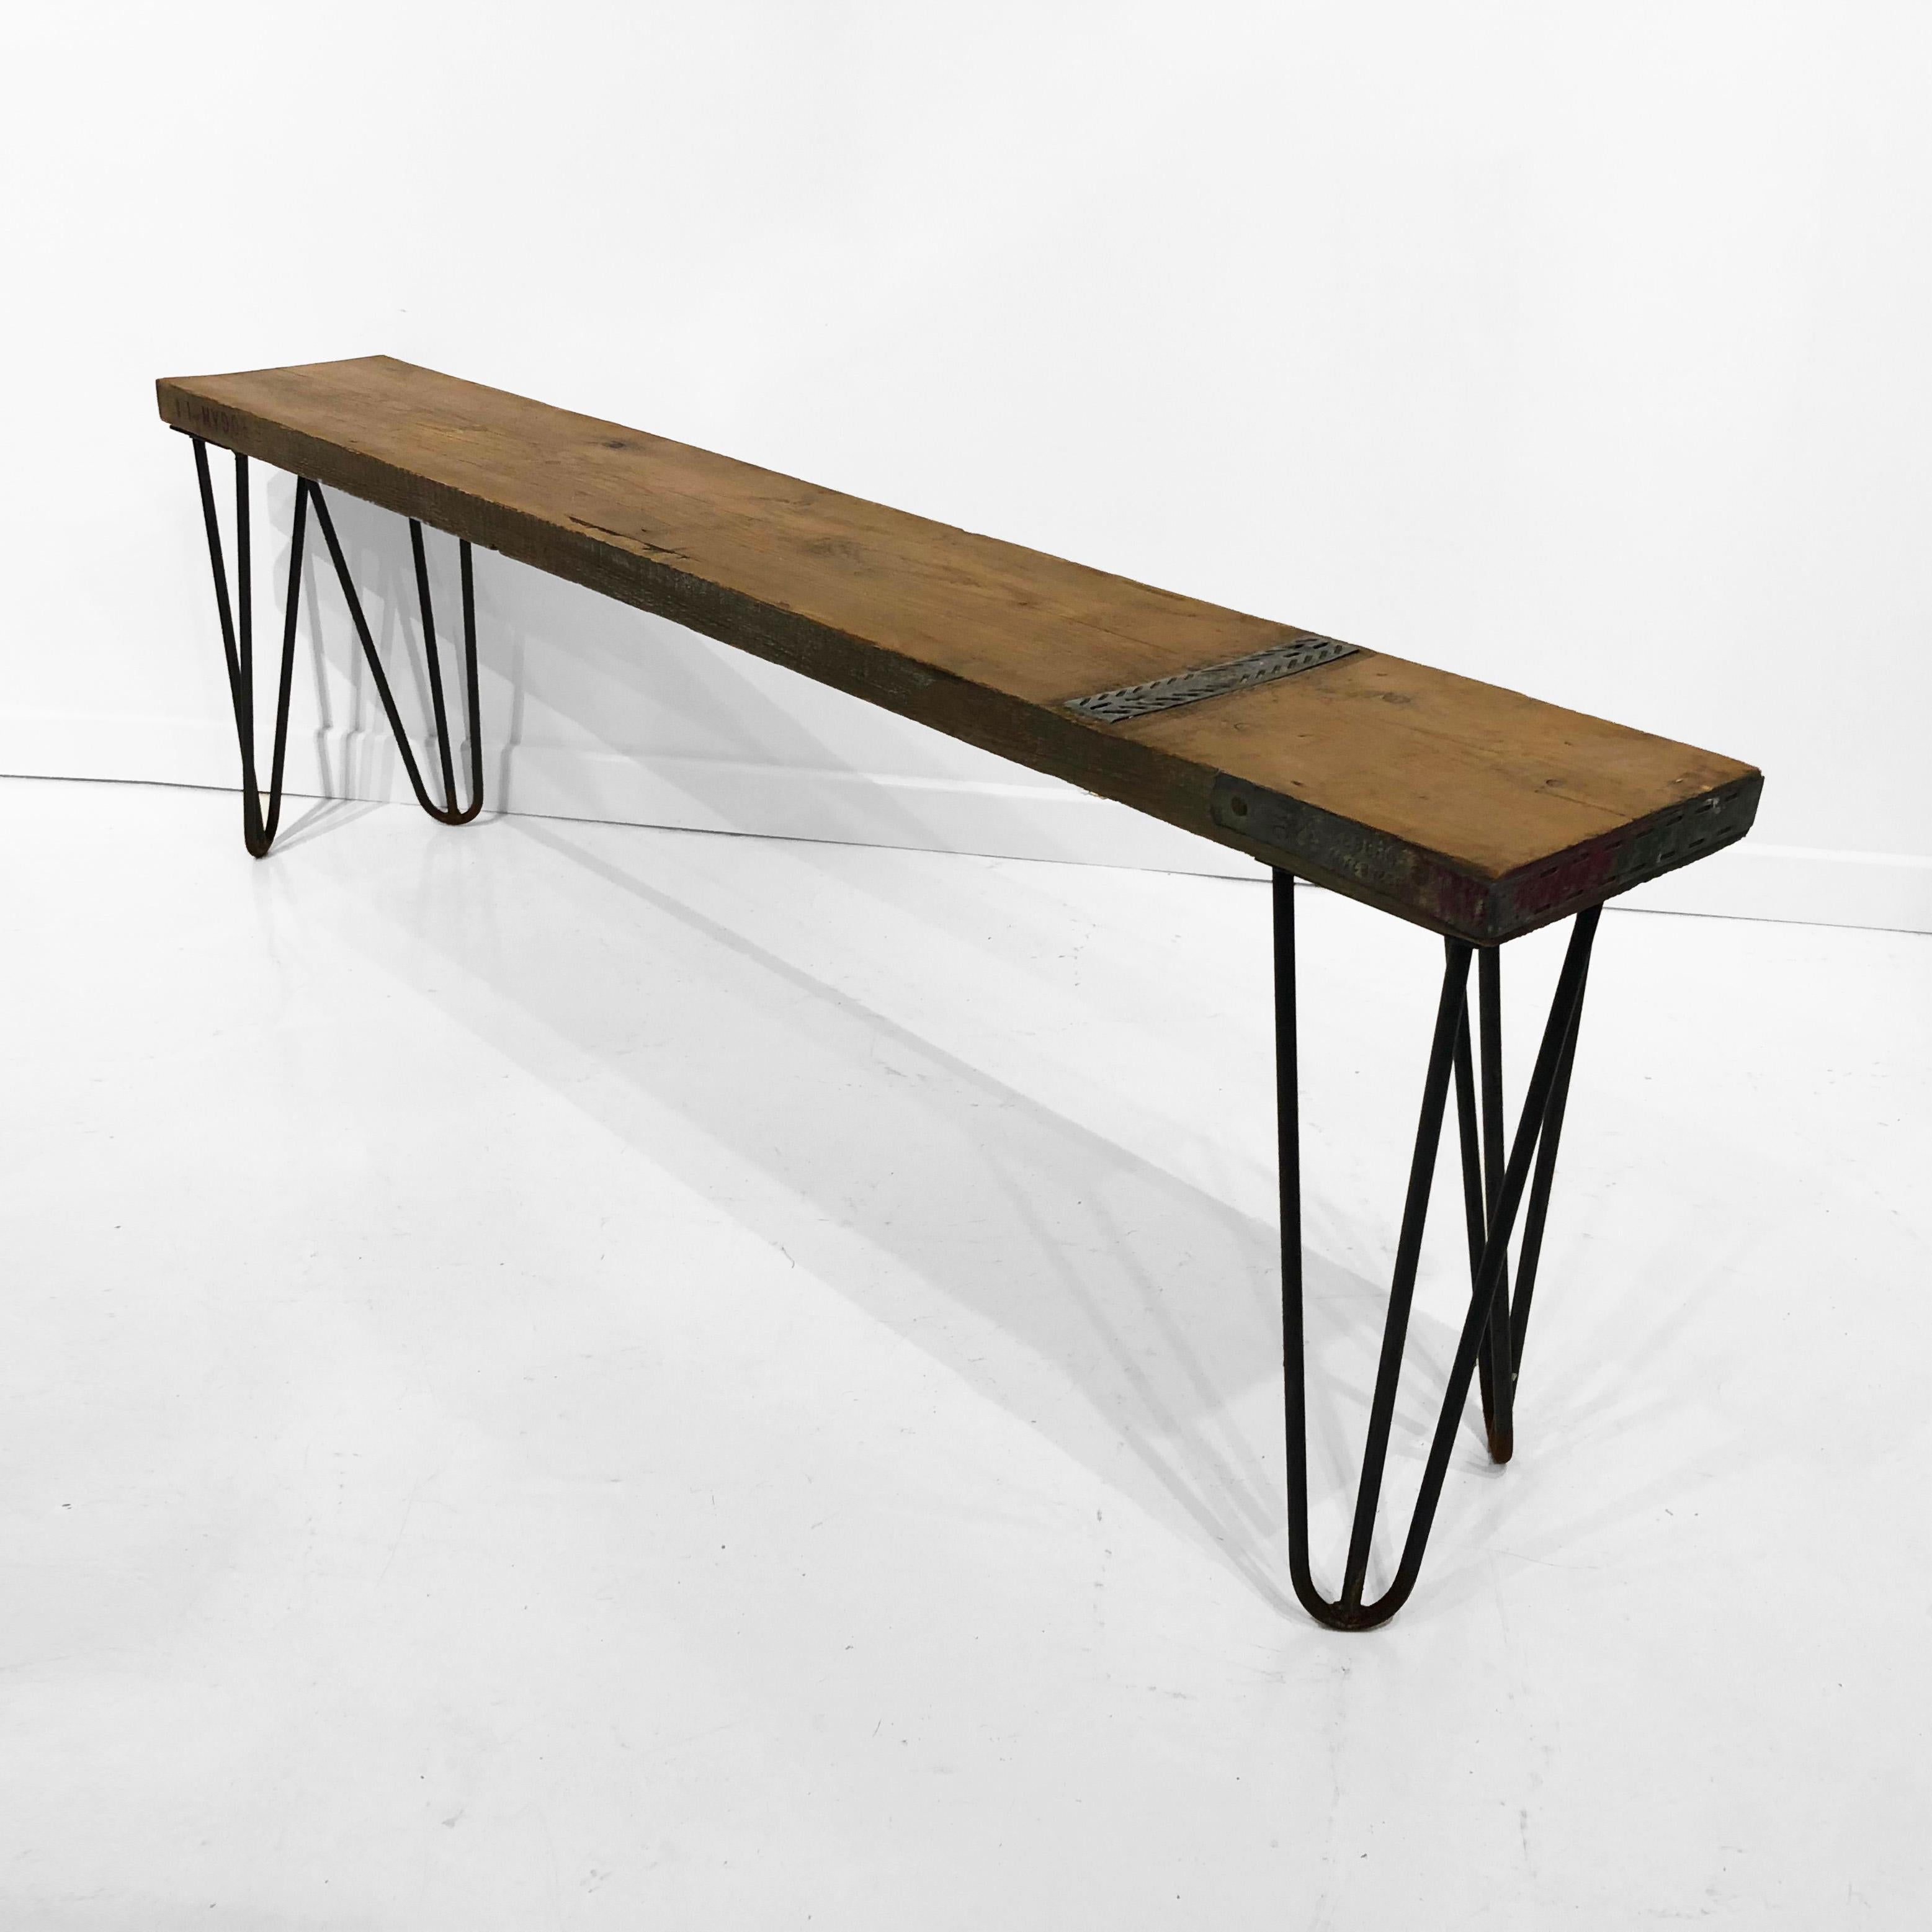 Iron Industrial Bench with Hairpin Legs and Scaffolding Wood Mid-Century Modern Seat For Sale